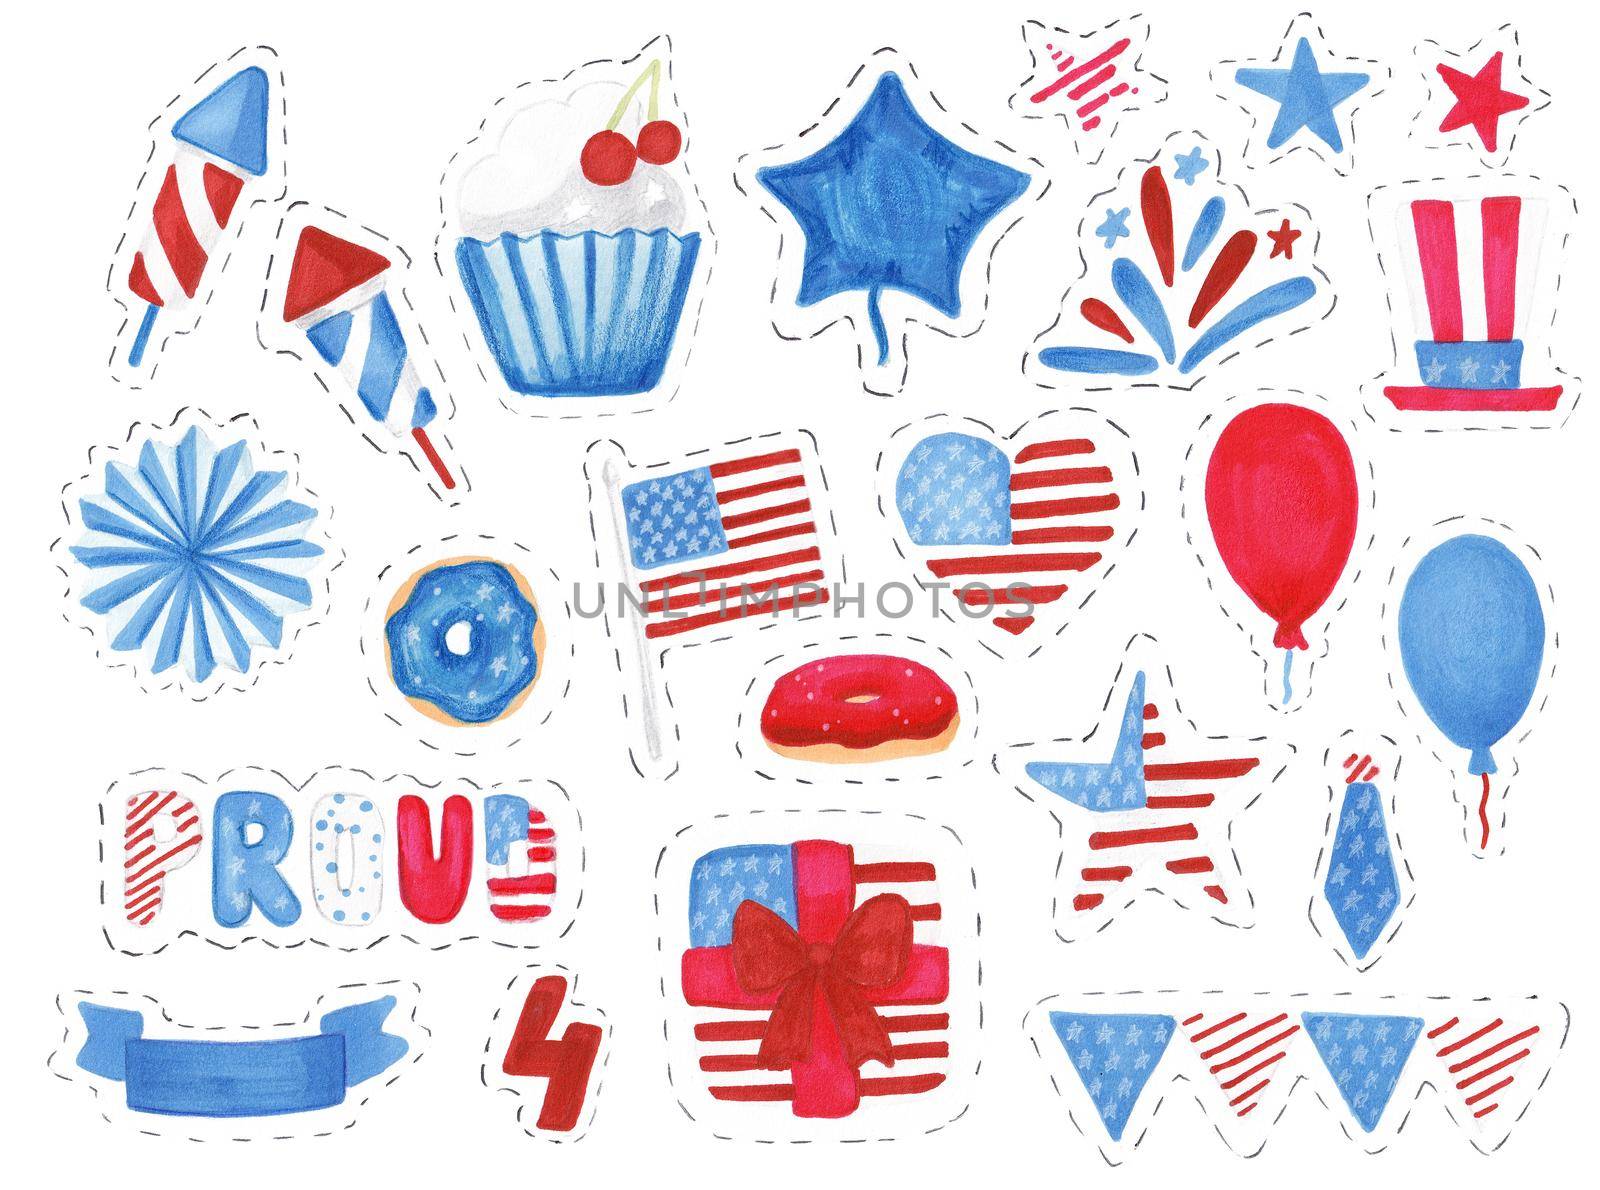 4th July - Independence day of United States of America - festive elements sticker set with different holiday symbols isolated on white background. Hand drawn marker illustration